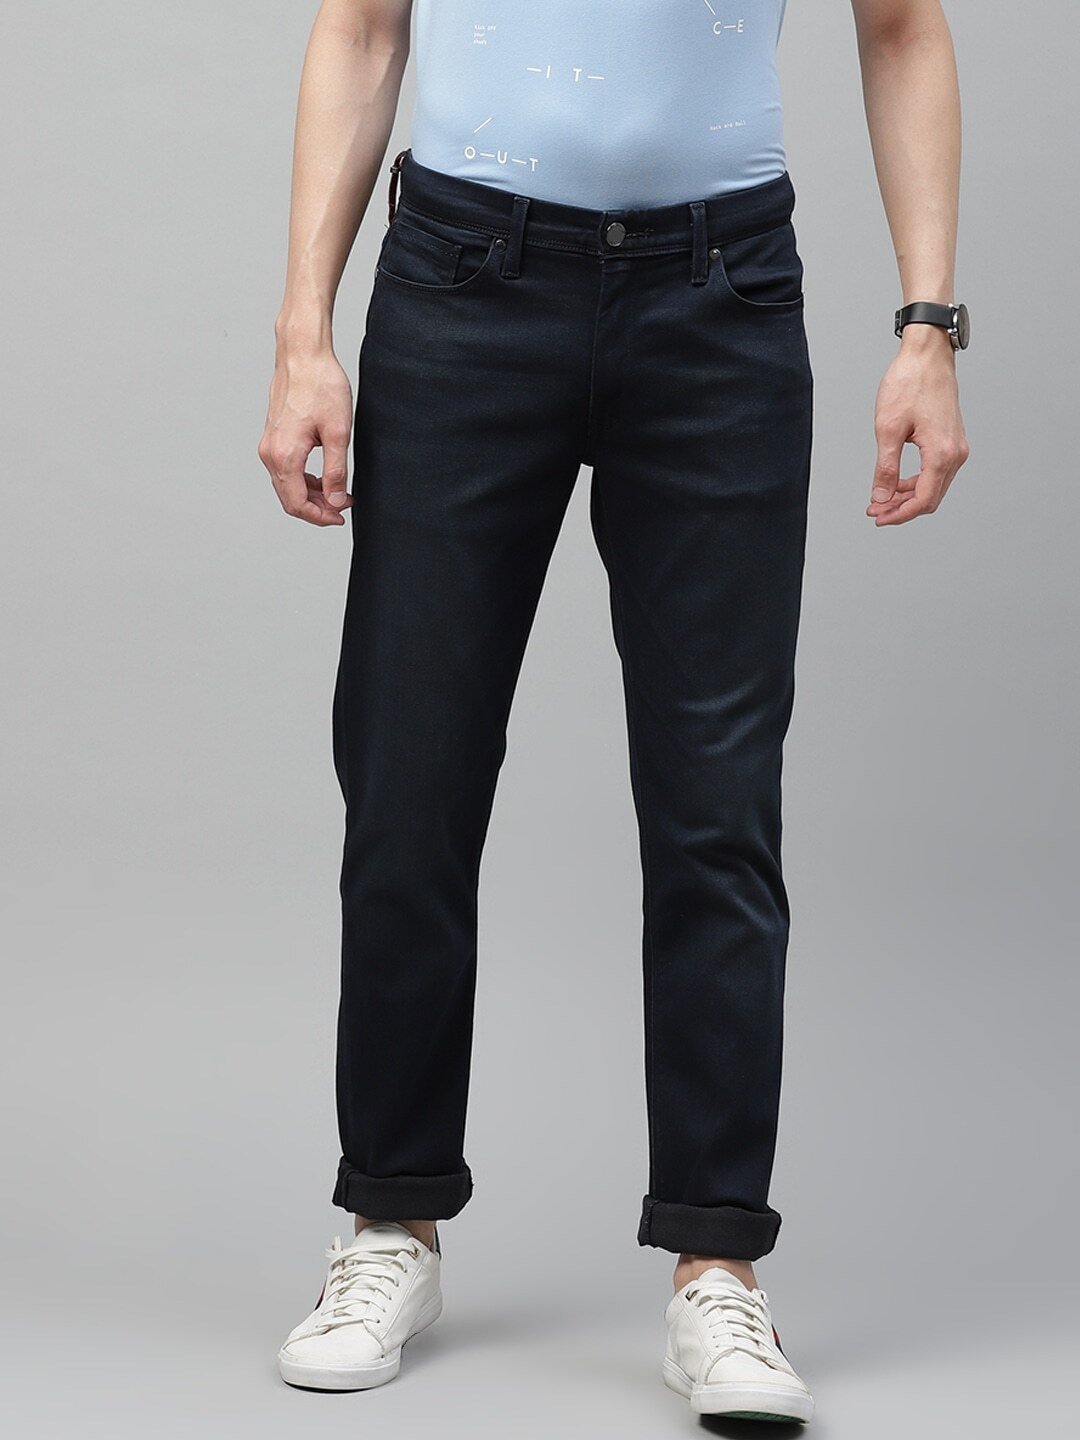 Men Black Solid Slim Fit Sustainable Stretchable Jeans-22573-0006